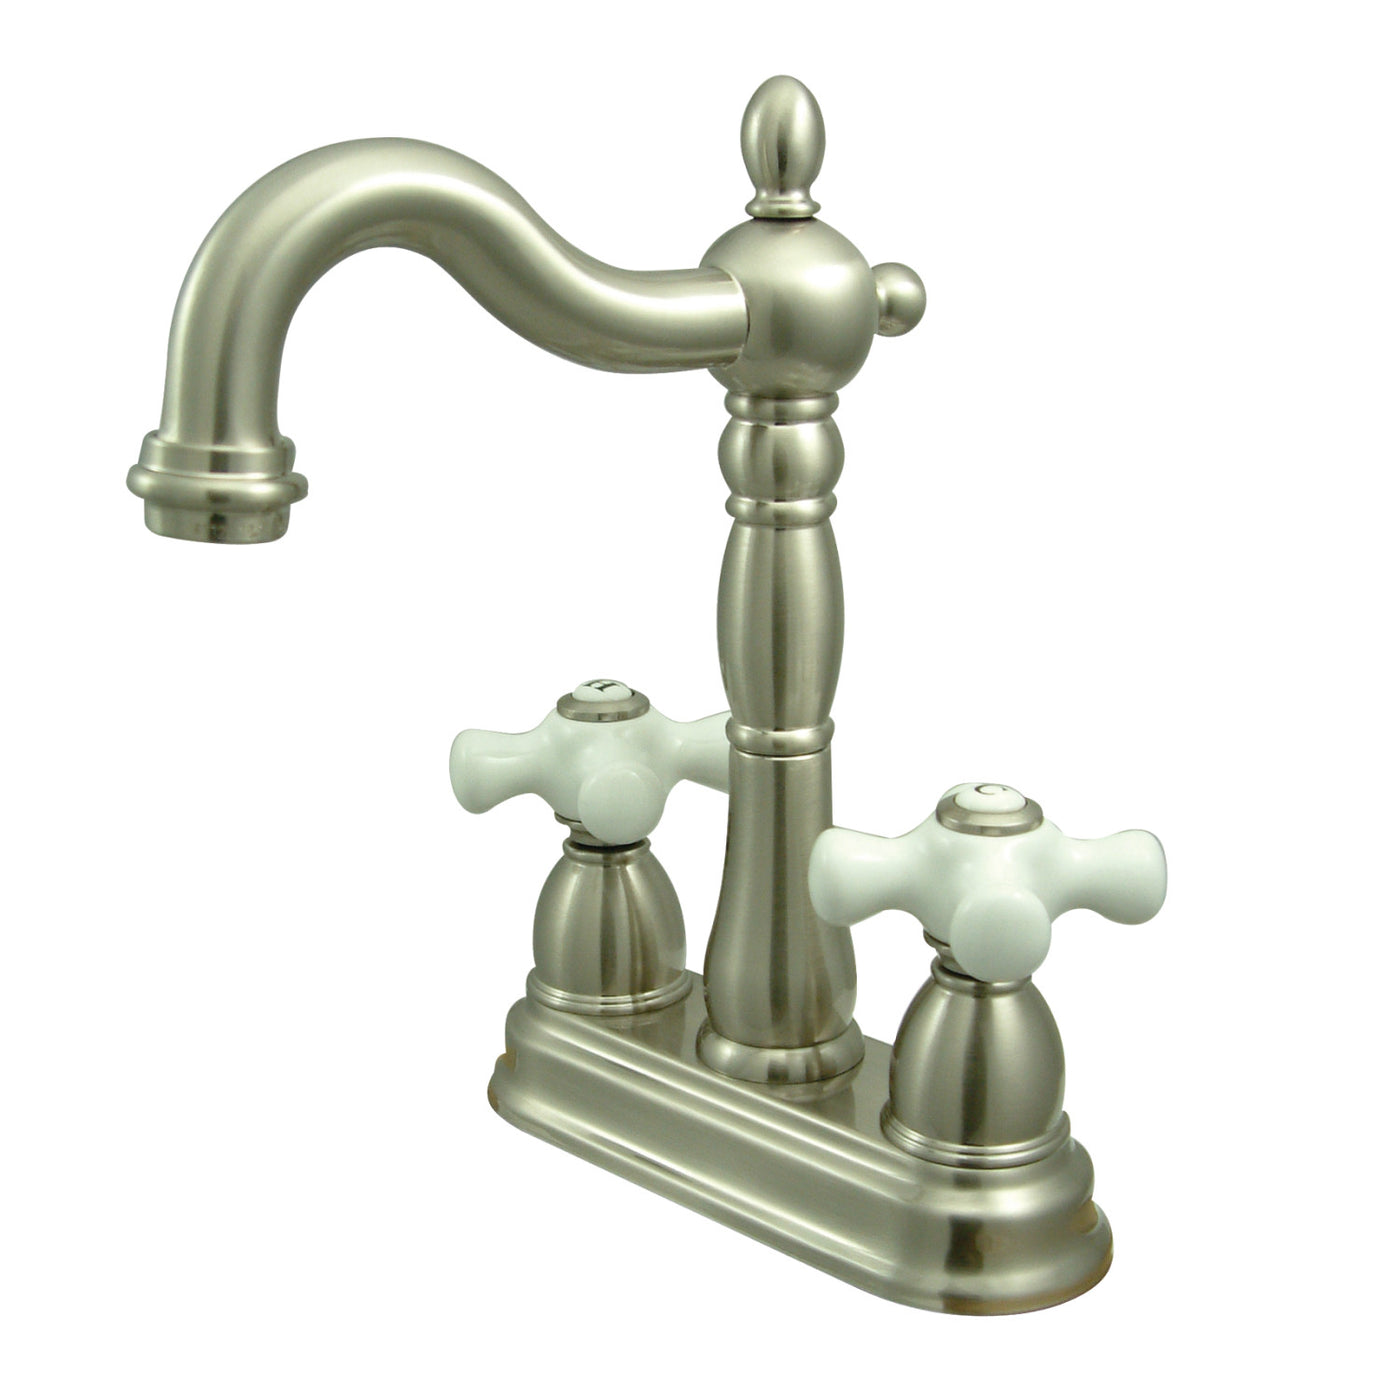 Elements of Design EB1498PX 4-Inch Centerset Bar Faucet, Brushed Nickel